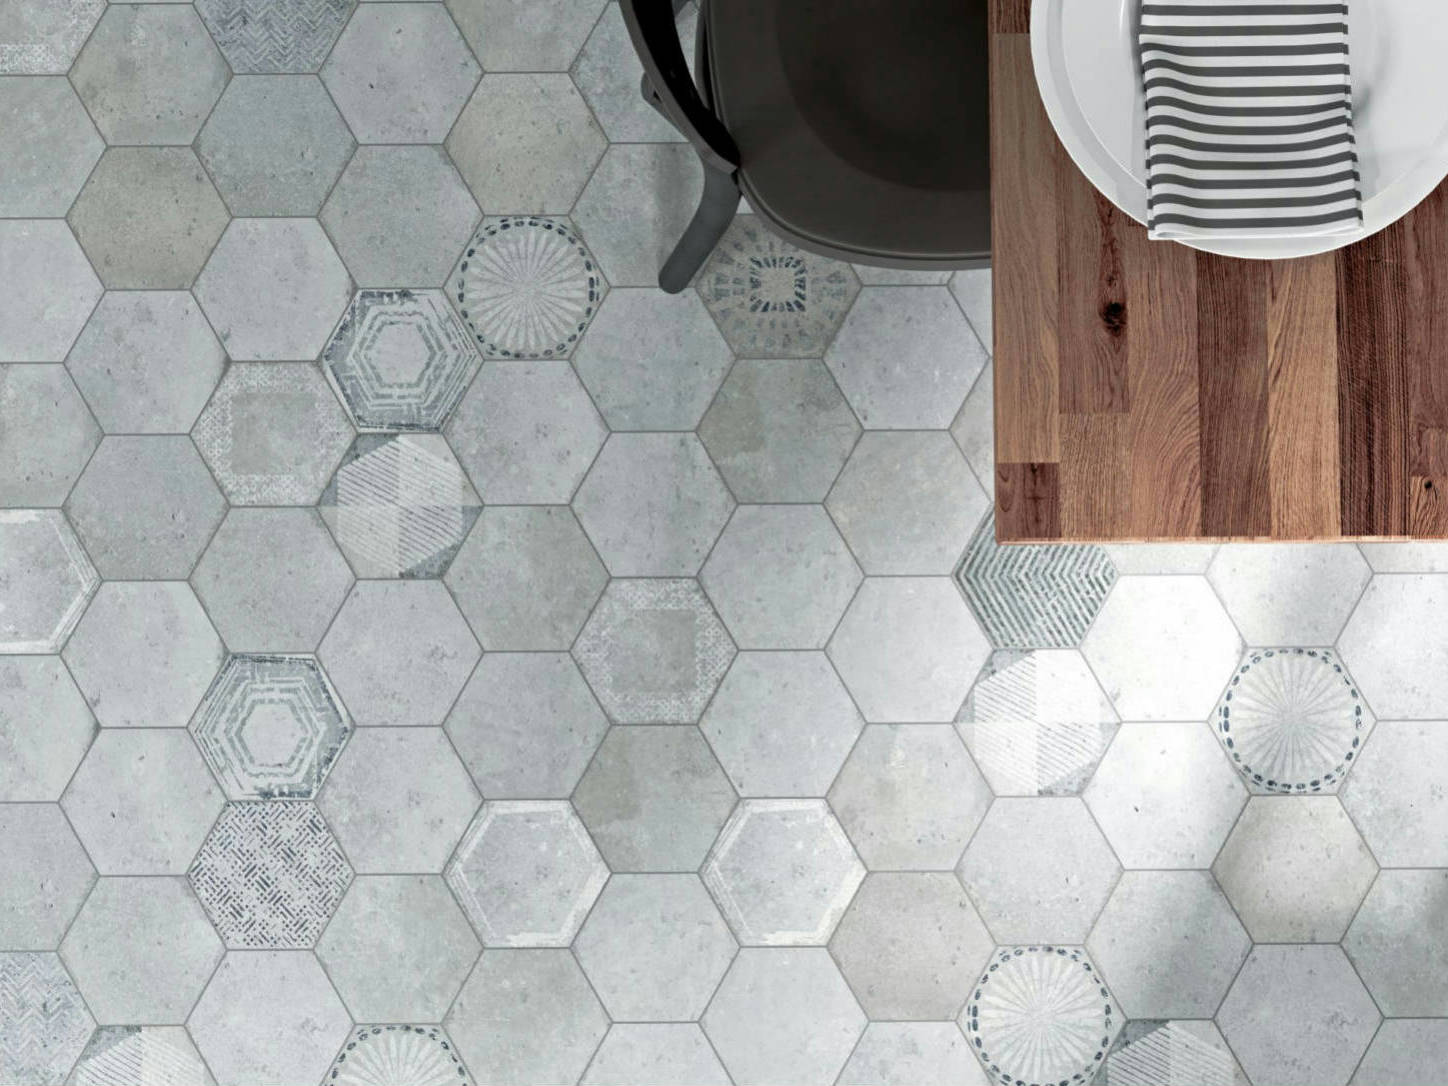 Alma 5.5x6.3” Grey and Grey Decor Hexagon | Qualis Ceramica | Luxury Tile and Vinyl at affordable prices